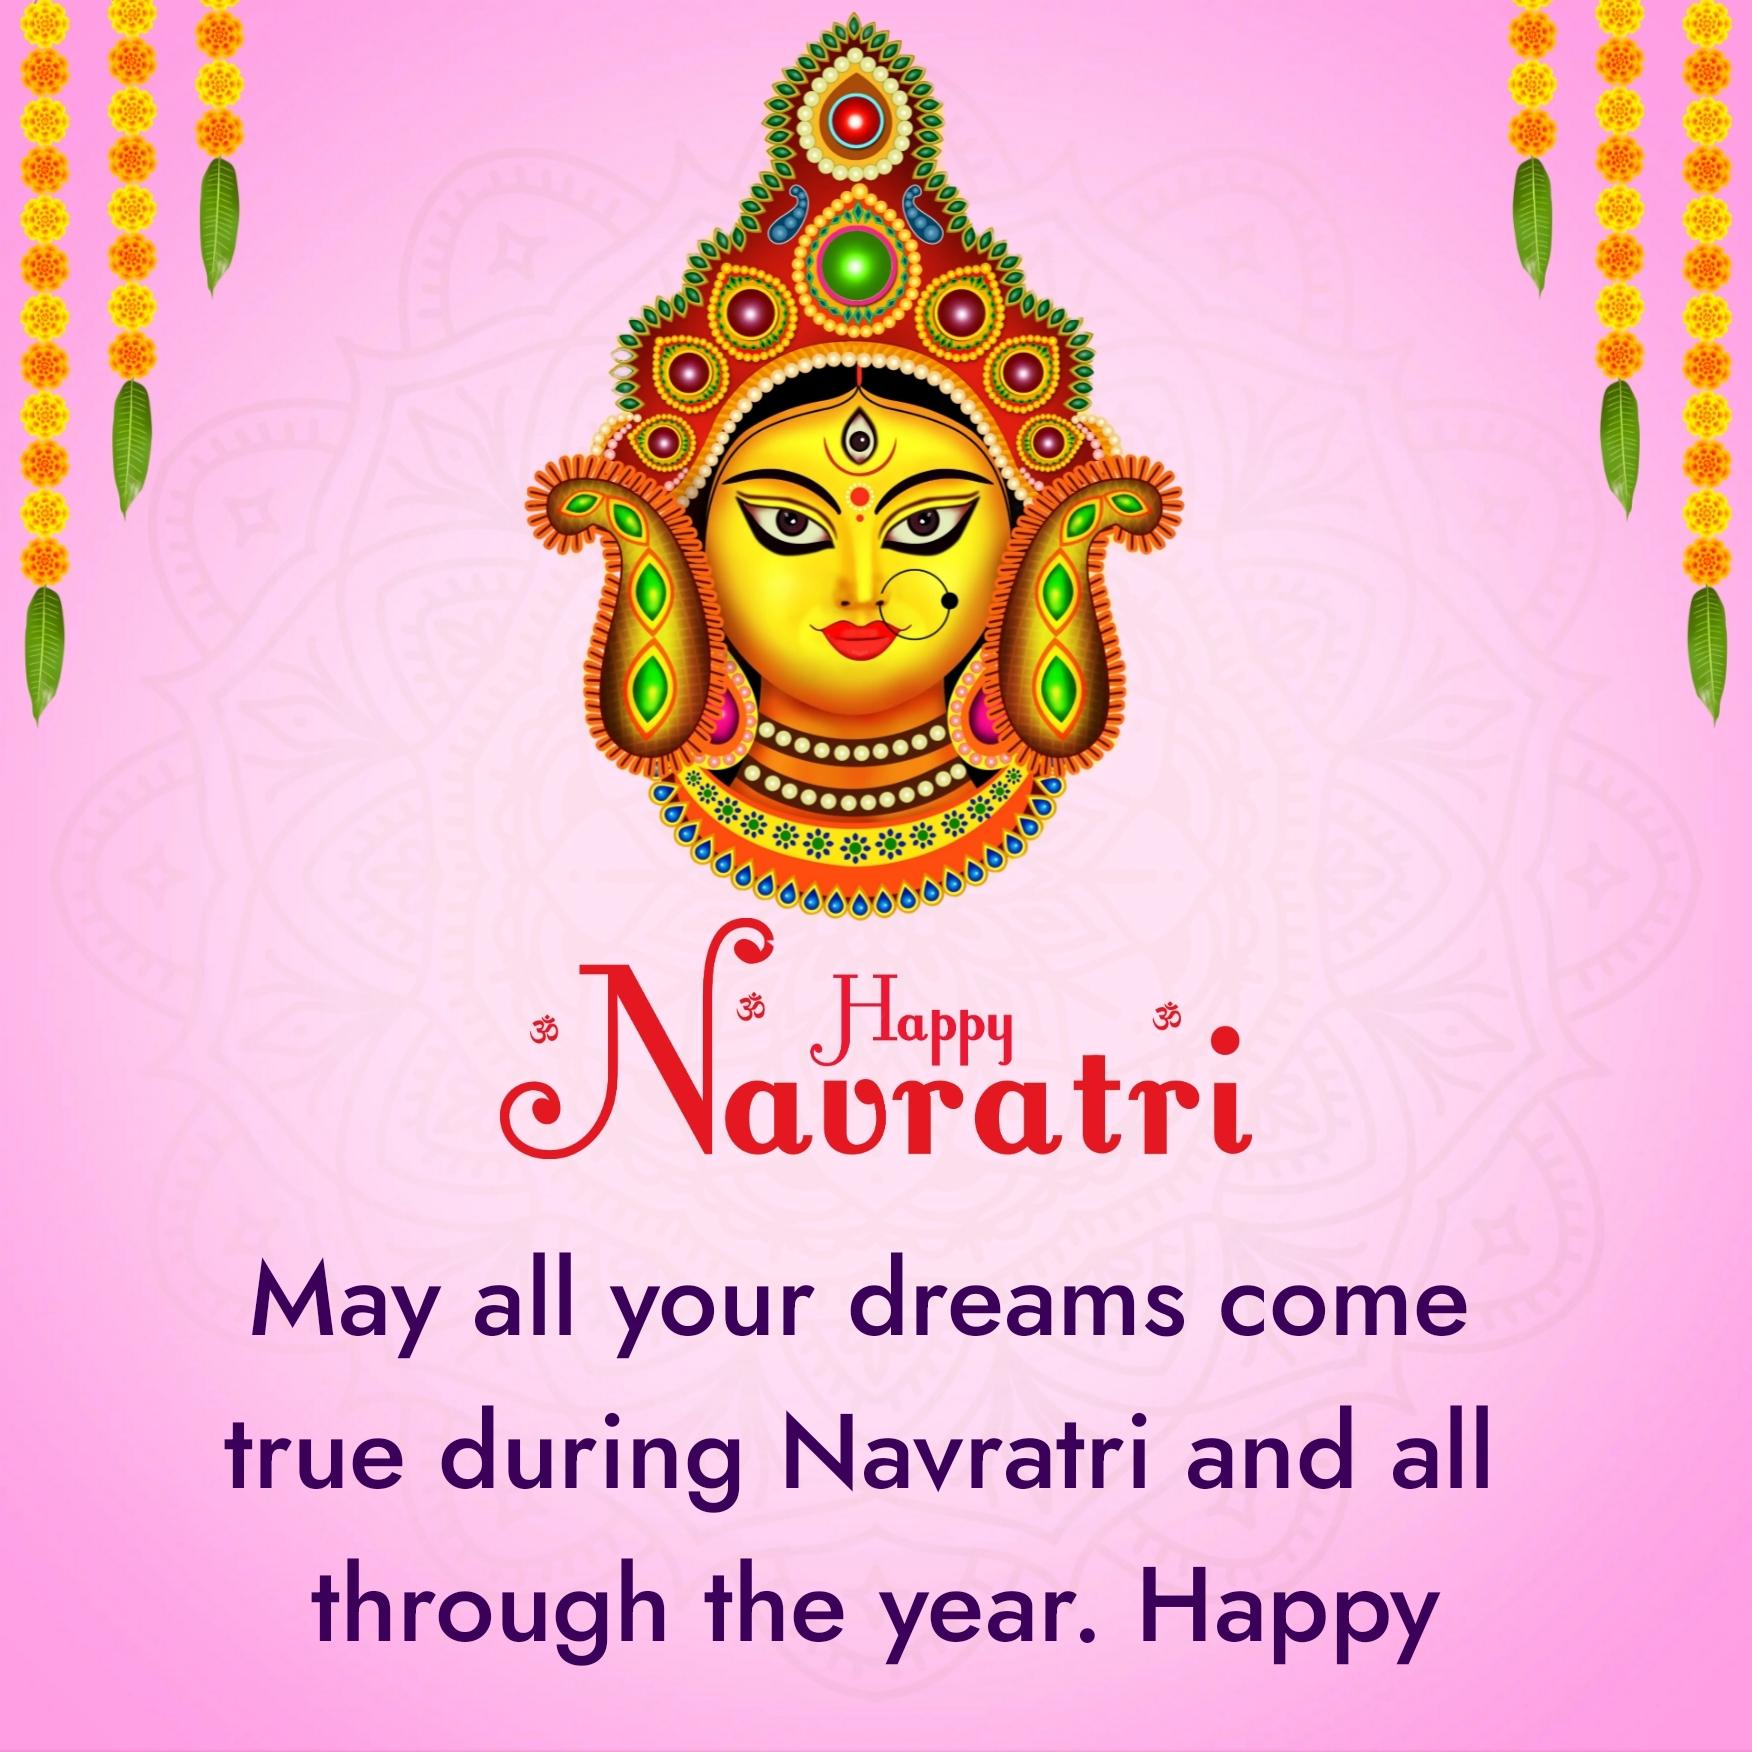 May all your dreams come true during Navratri